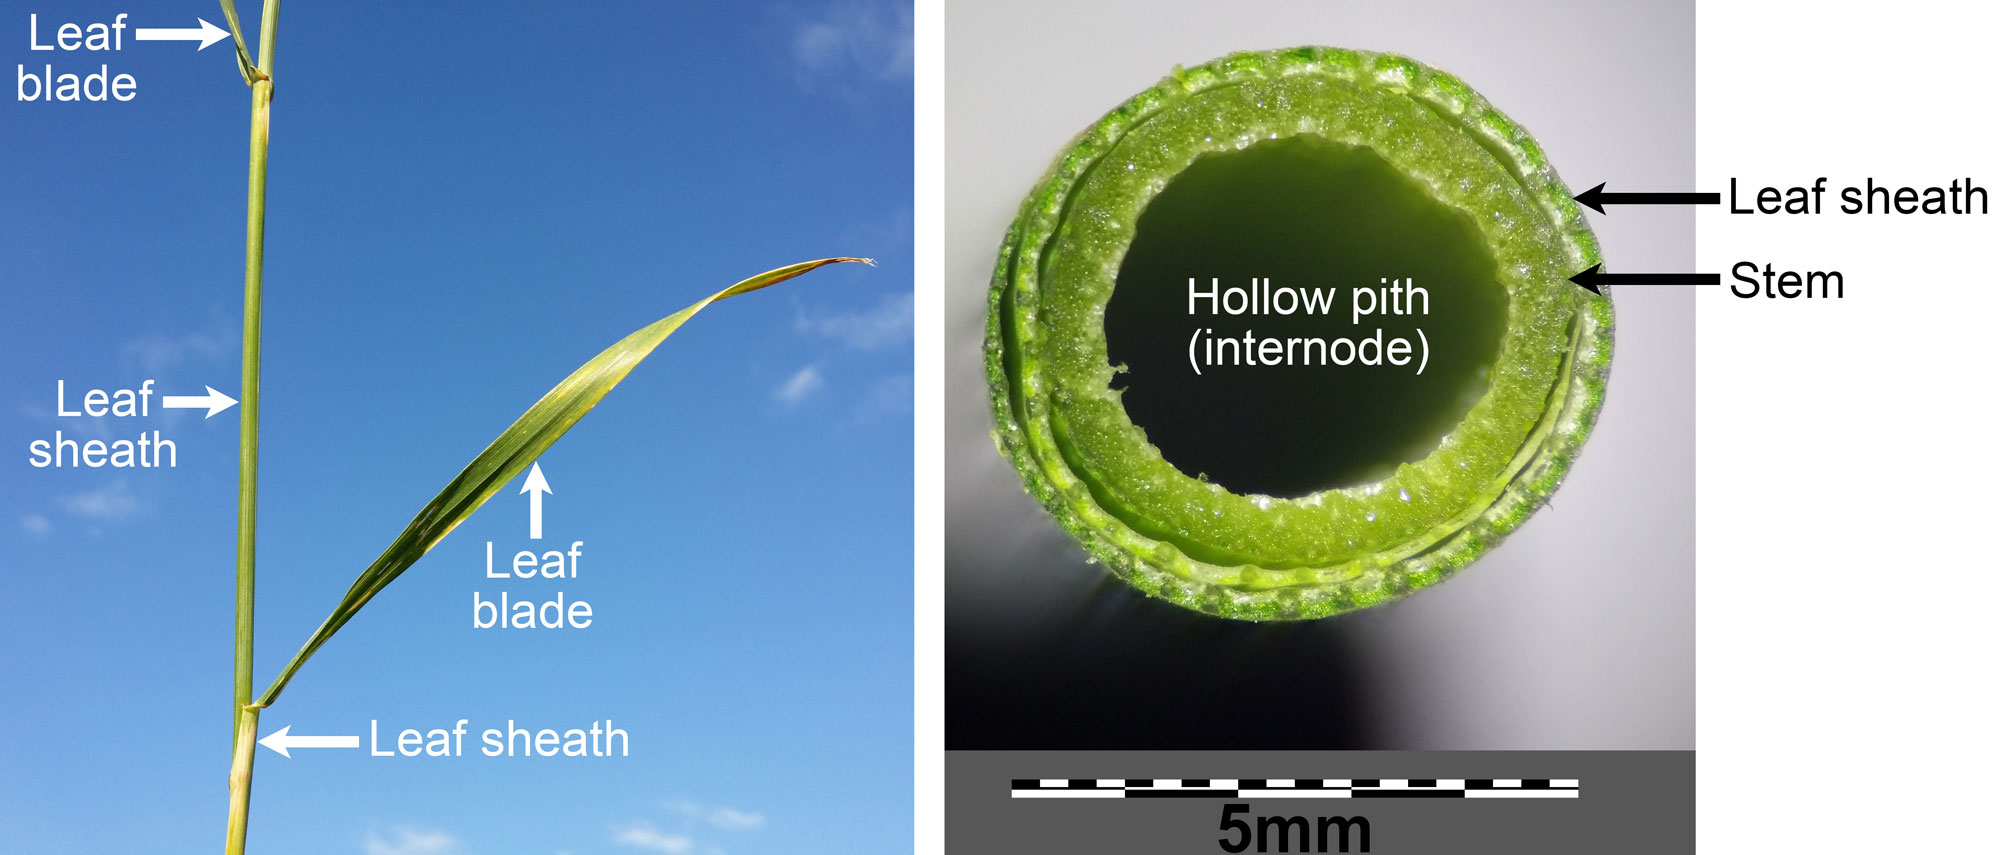 2-Panel photographic figure showing spelt. Panel 1: Photograph of a portion of a grass culm showing two nodes and the internode between. Two leaf blades and two leaf sheath are labeled. Panel 2: Cross section of a stem surrounded by a leaf sheath (the cross section is a fresh section from a plant, not a slide). The stem is circular in cross section with a large hollow pith. The leaf sheath forms a thin concentric ring around the stem.